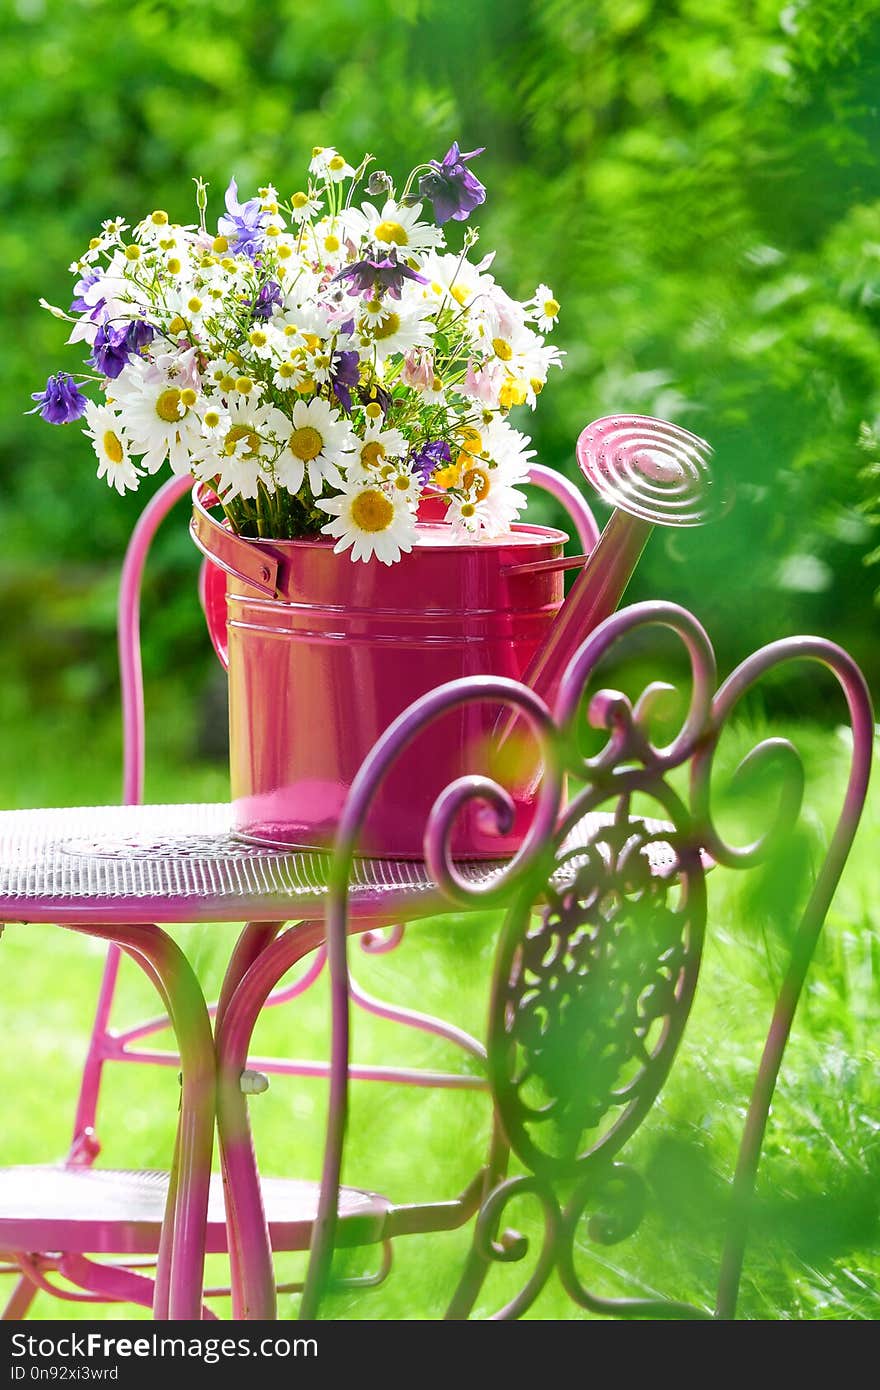 Colorful wild flower bouquet in a pink watering can on a garden chair